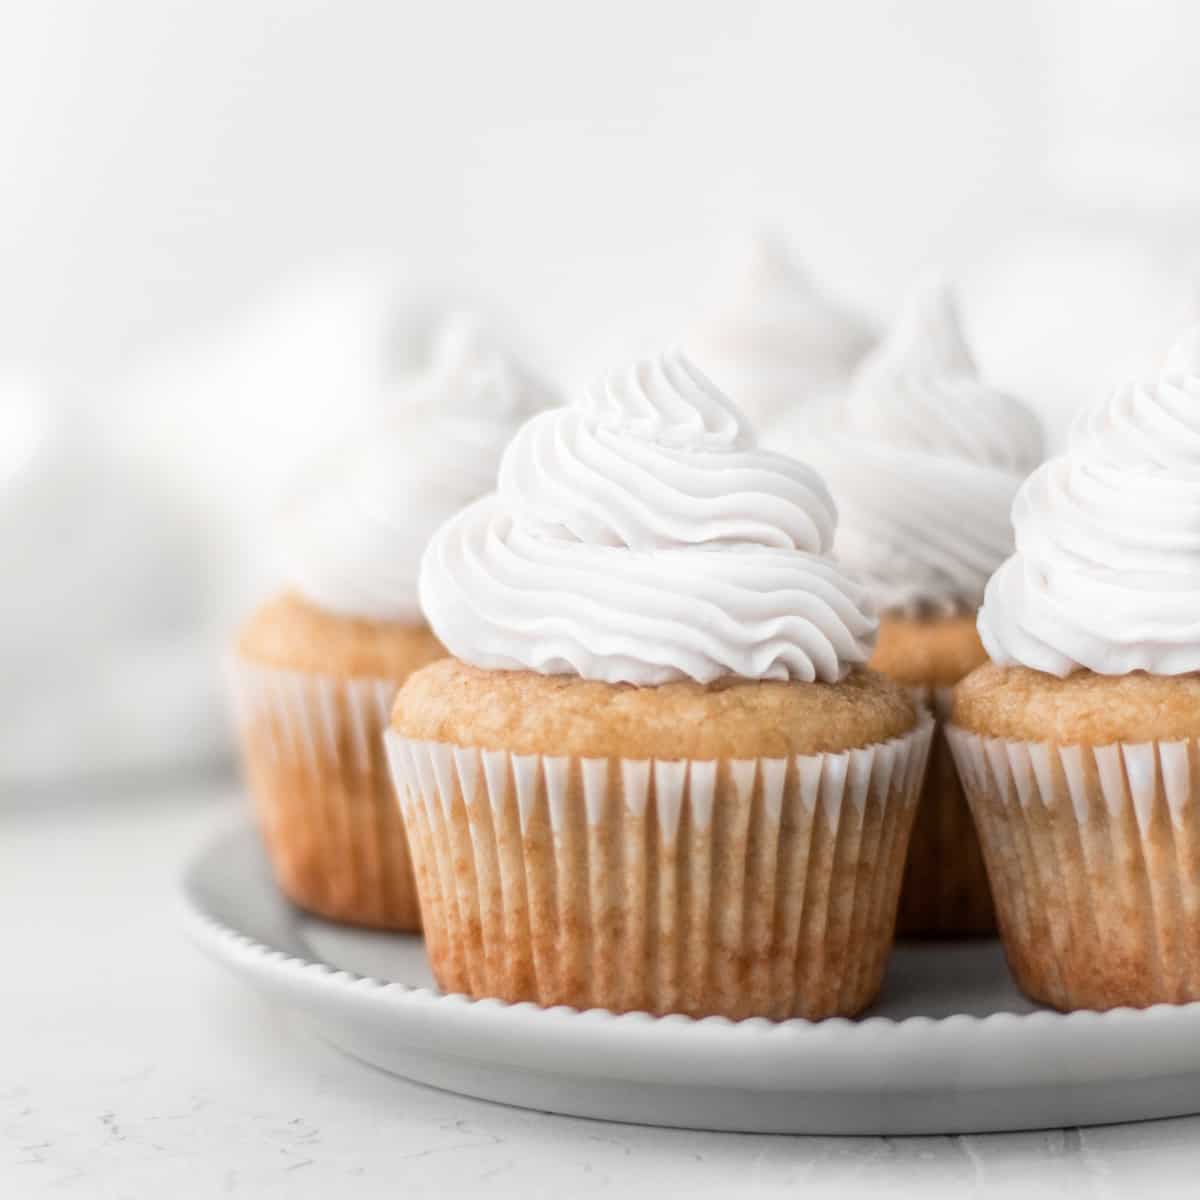 How to Make Uniform Sized Cupcakes